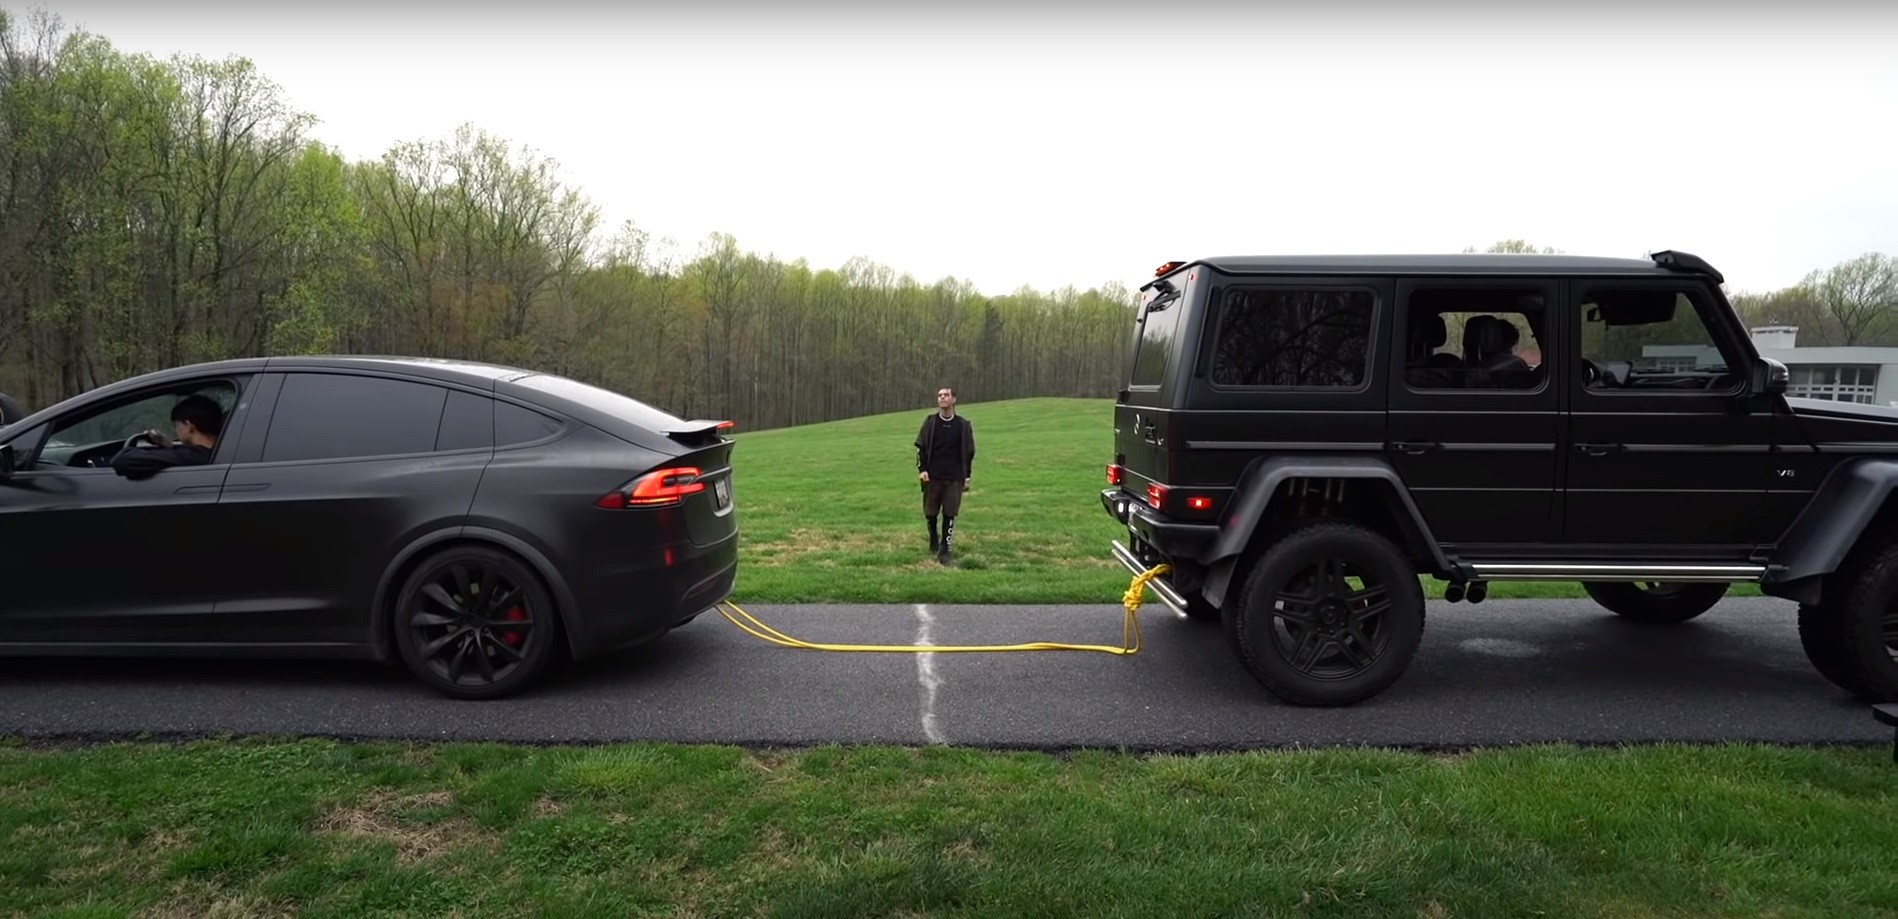 Mercedes Benz G550 4x4 Squared Vs Tesla Model X Tug Of War Is Closely Fought Autoevolution